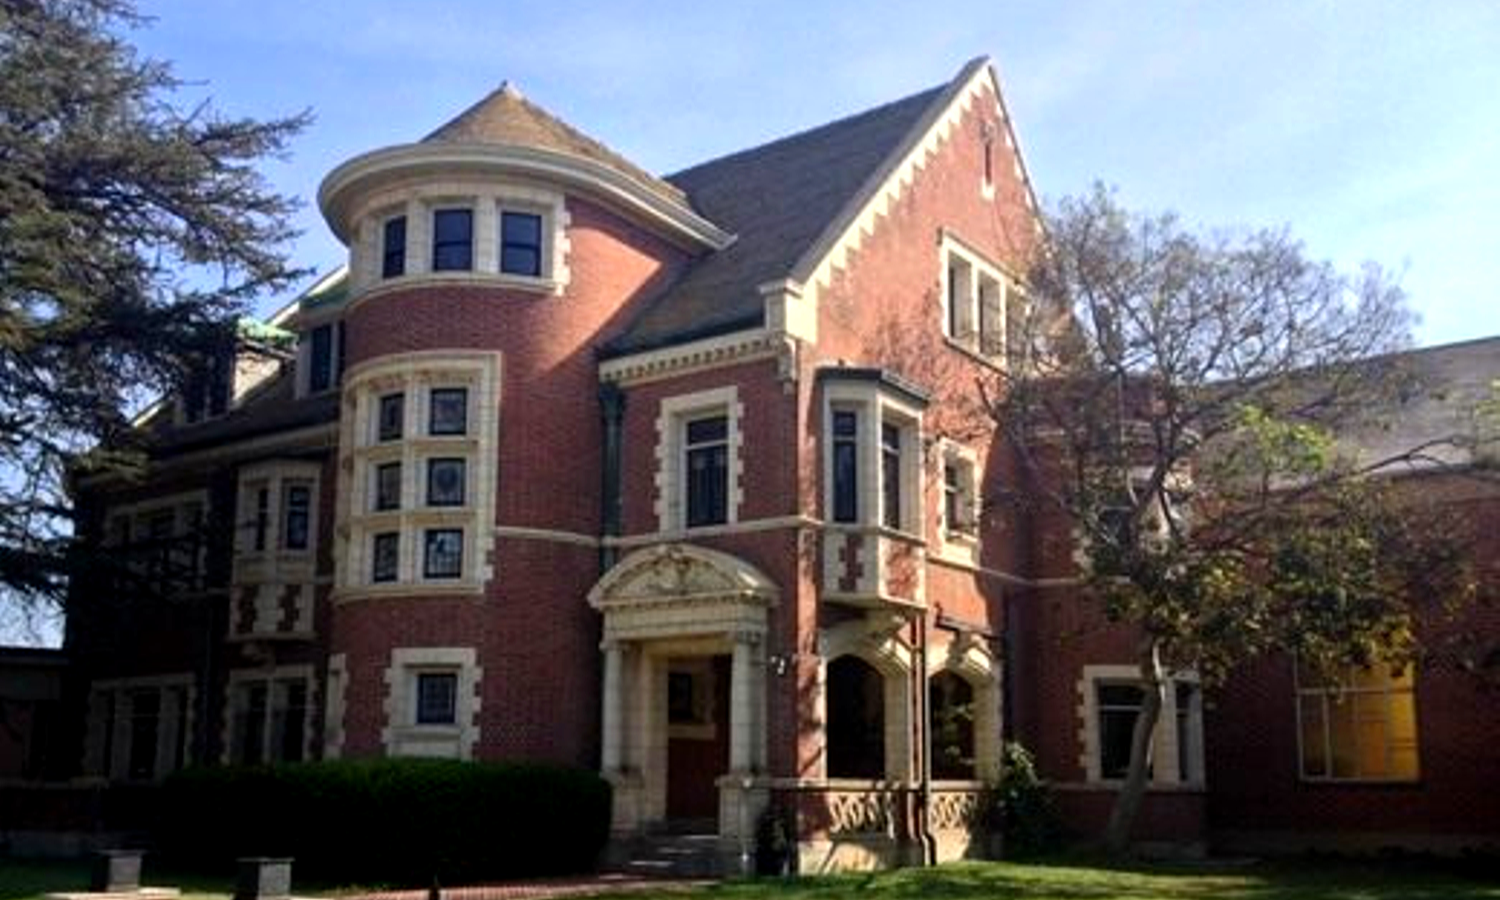 Picture of large red brick mansion. 